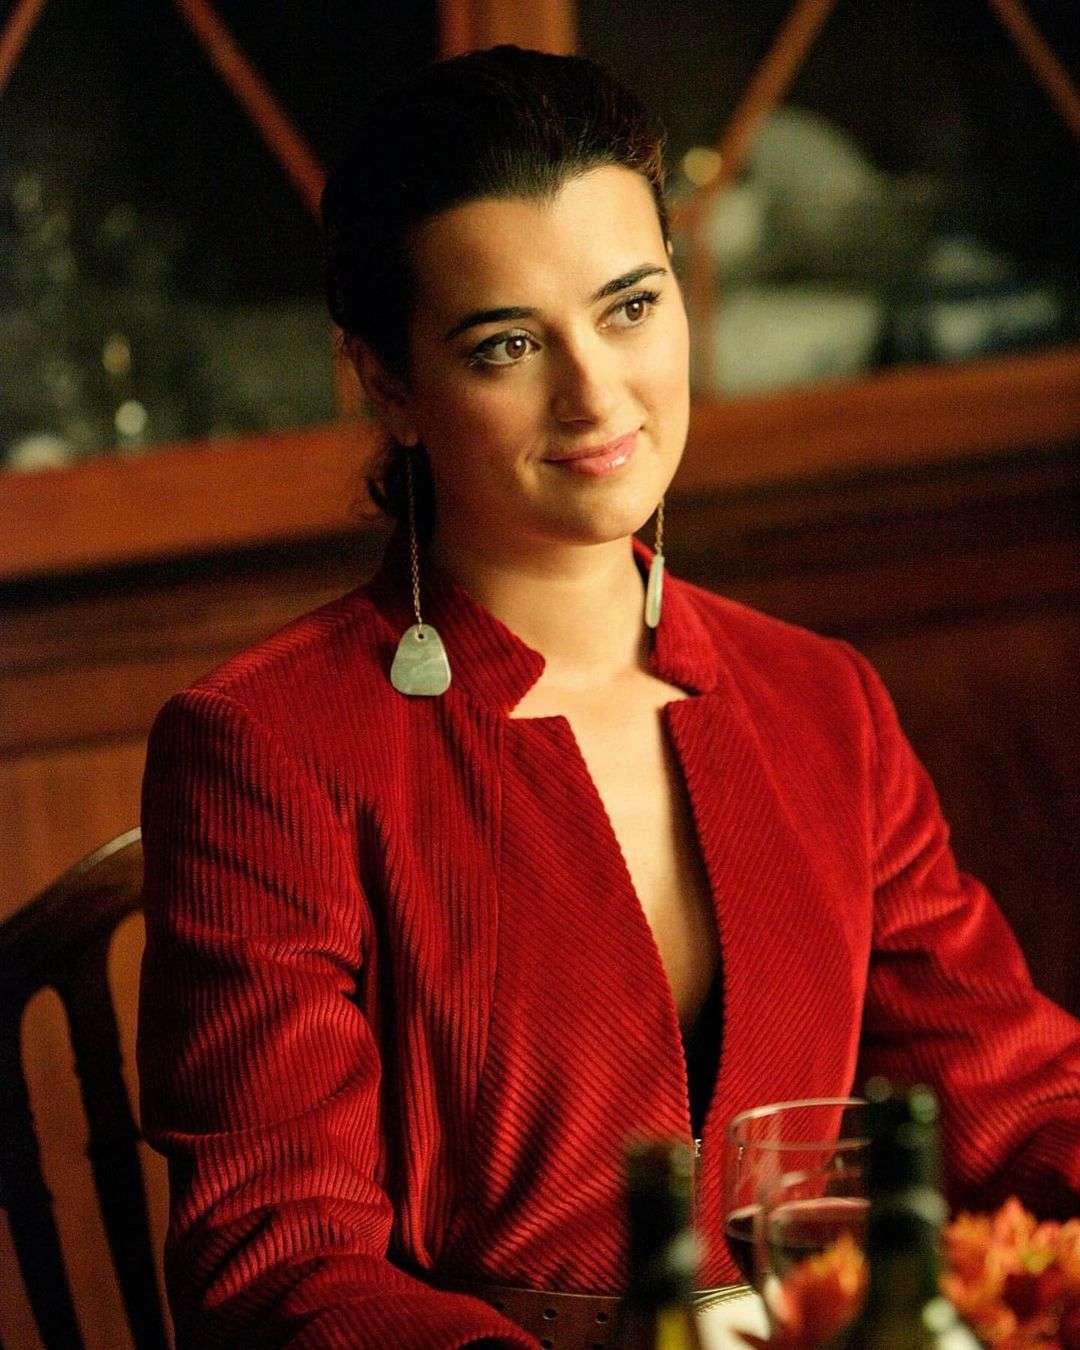 75+ Hot Pictures of Cote De Pablo From NCIS Will Raise Your Spirits | Best Of Comic Books